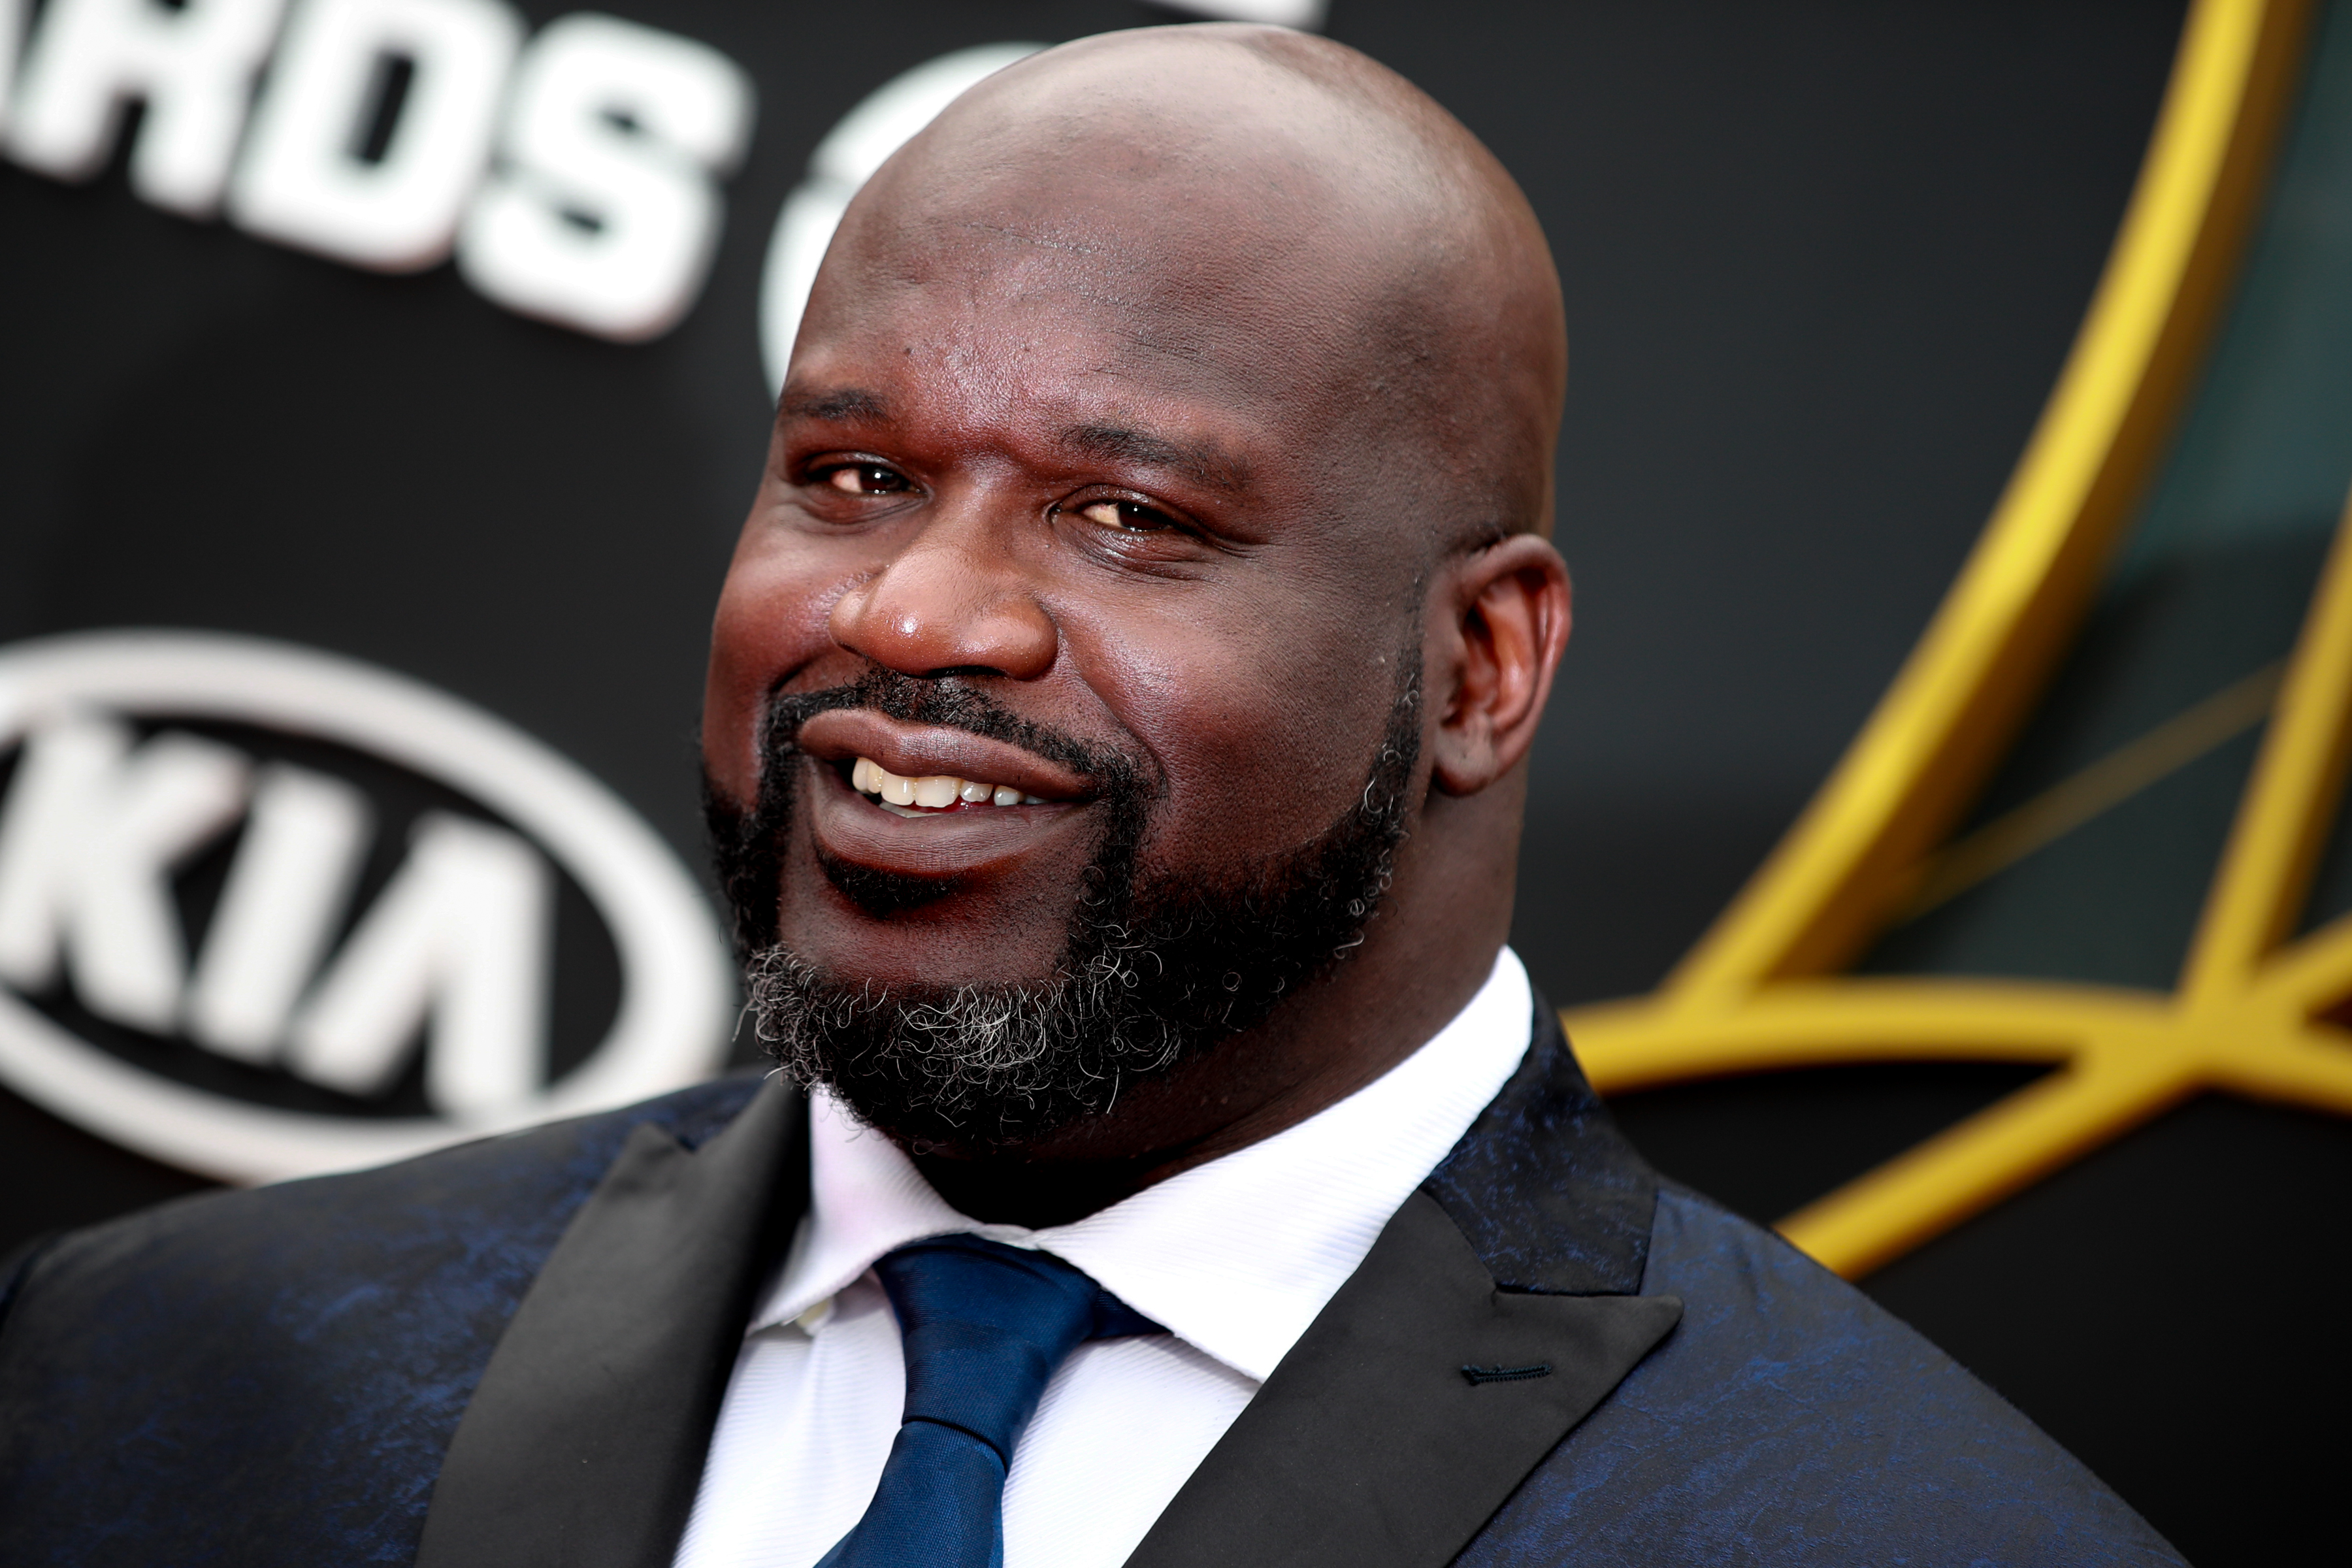 Shaquille O'Neal attends the 2019 NBA Awards at Barker Hangar on June 24, 2019, in Santa Monica, California. | Source: Getty Images